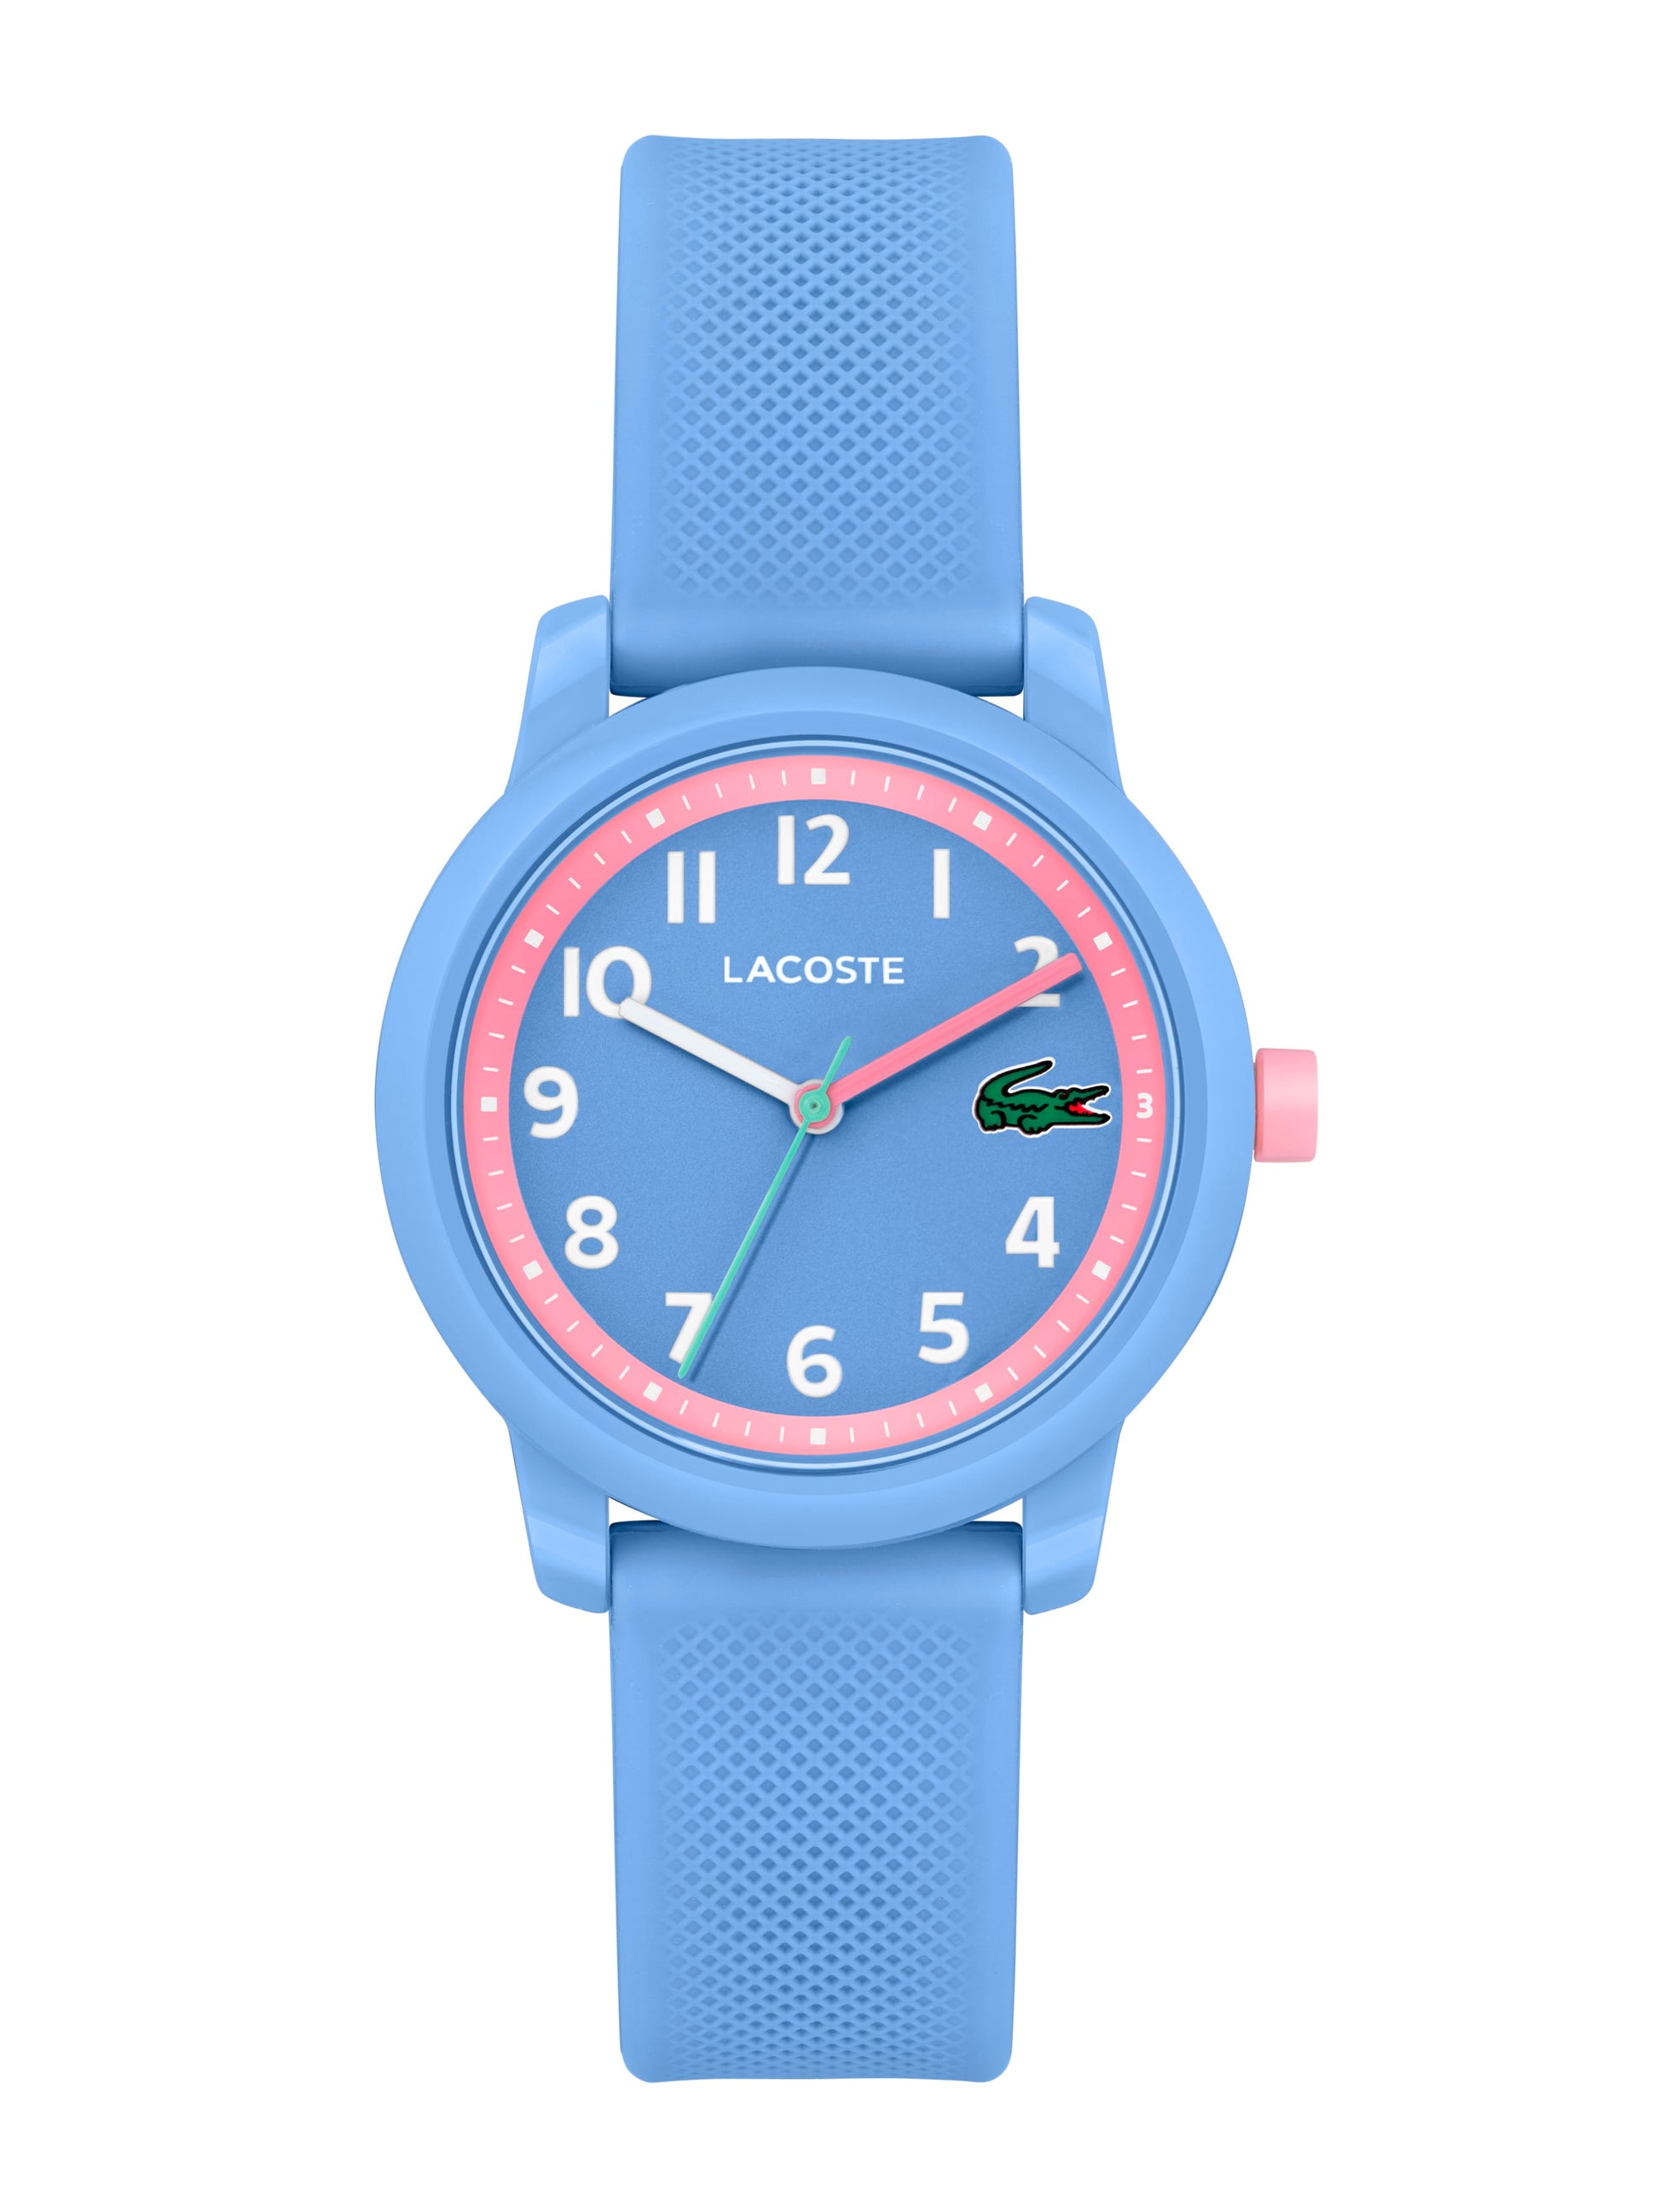 Kids Lacoste.12.12 Light Blue Watch 2030041 in blue and pink.